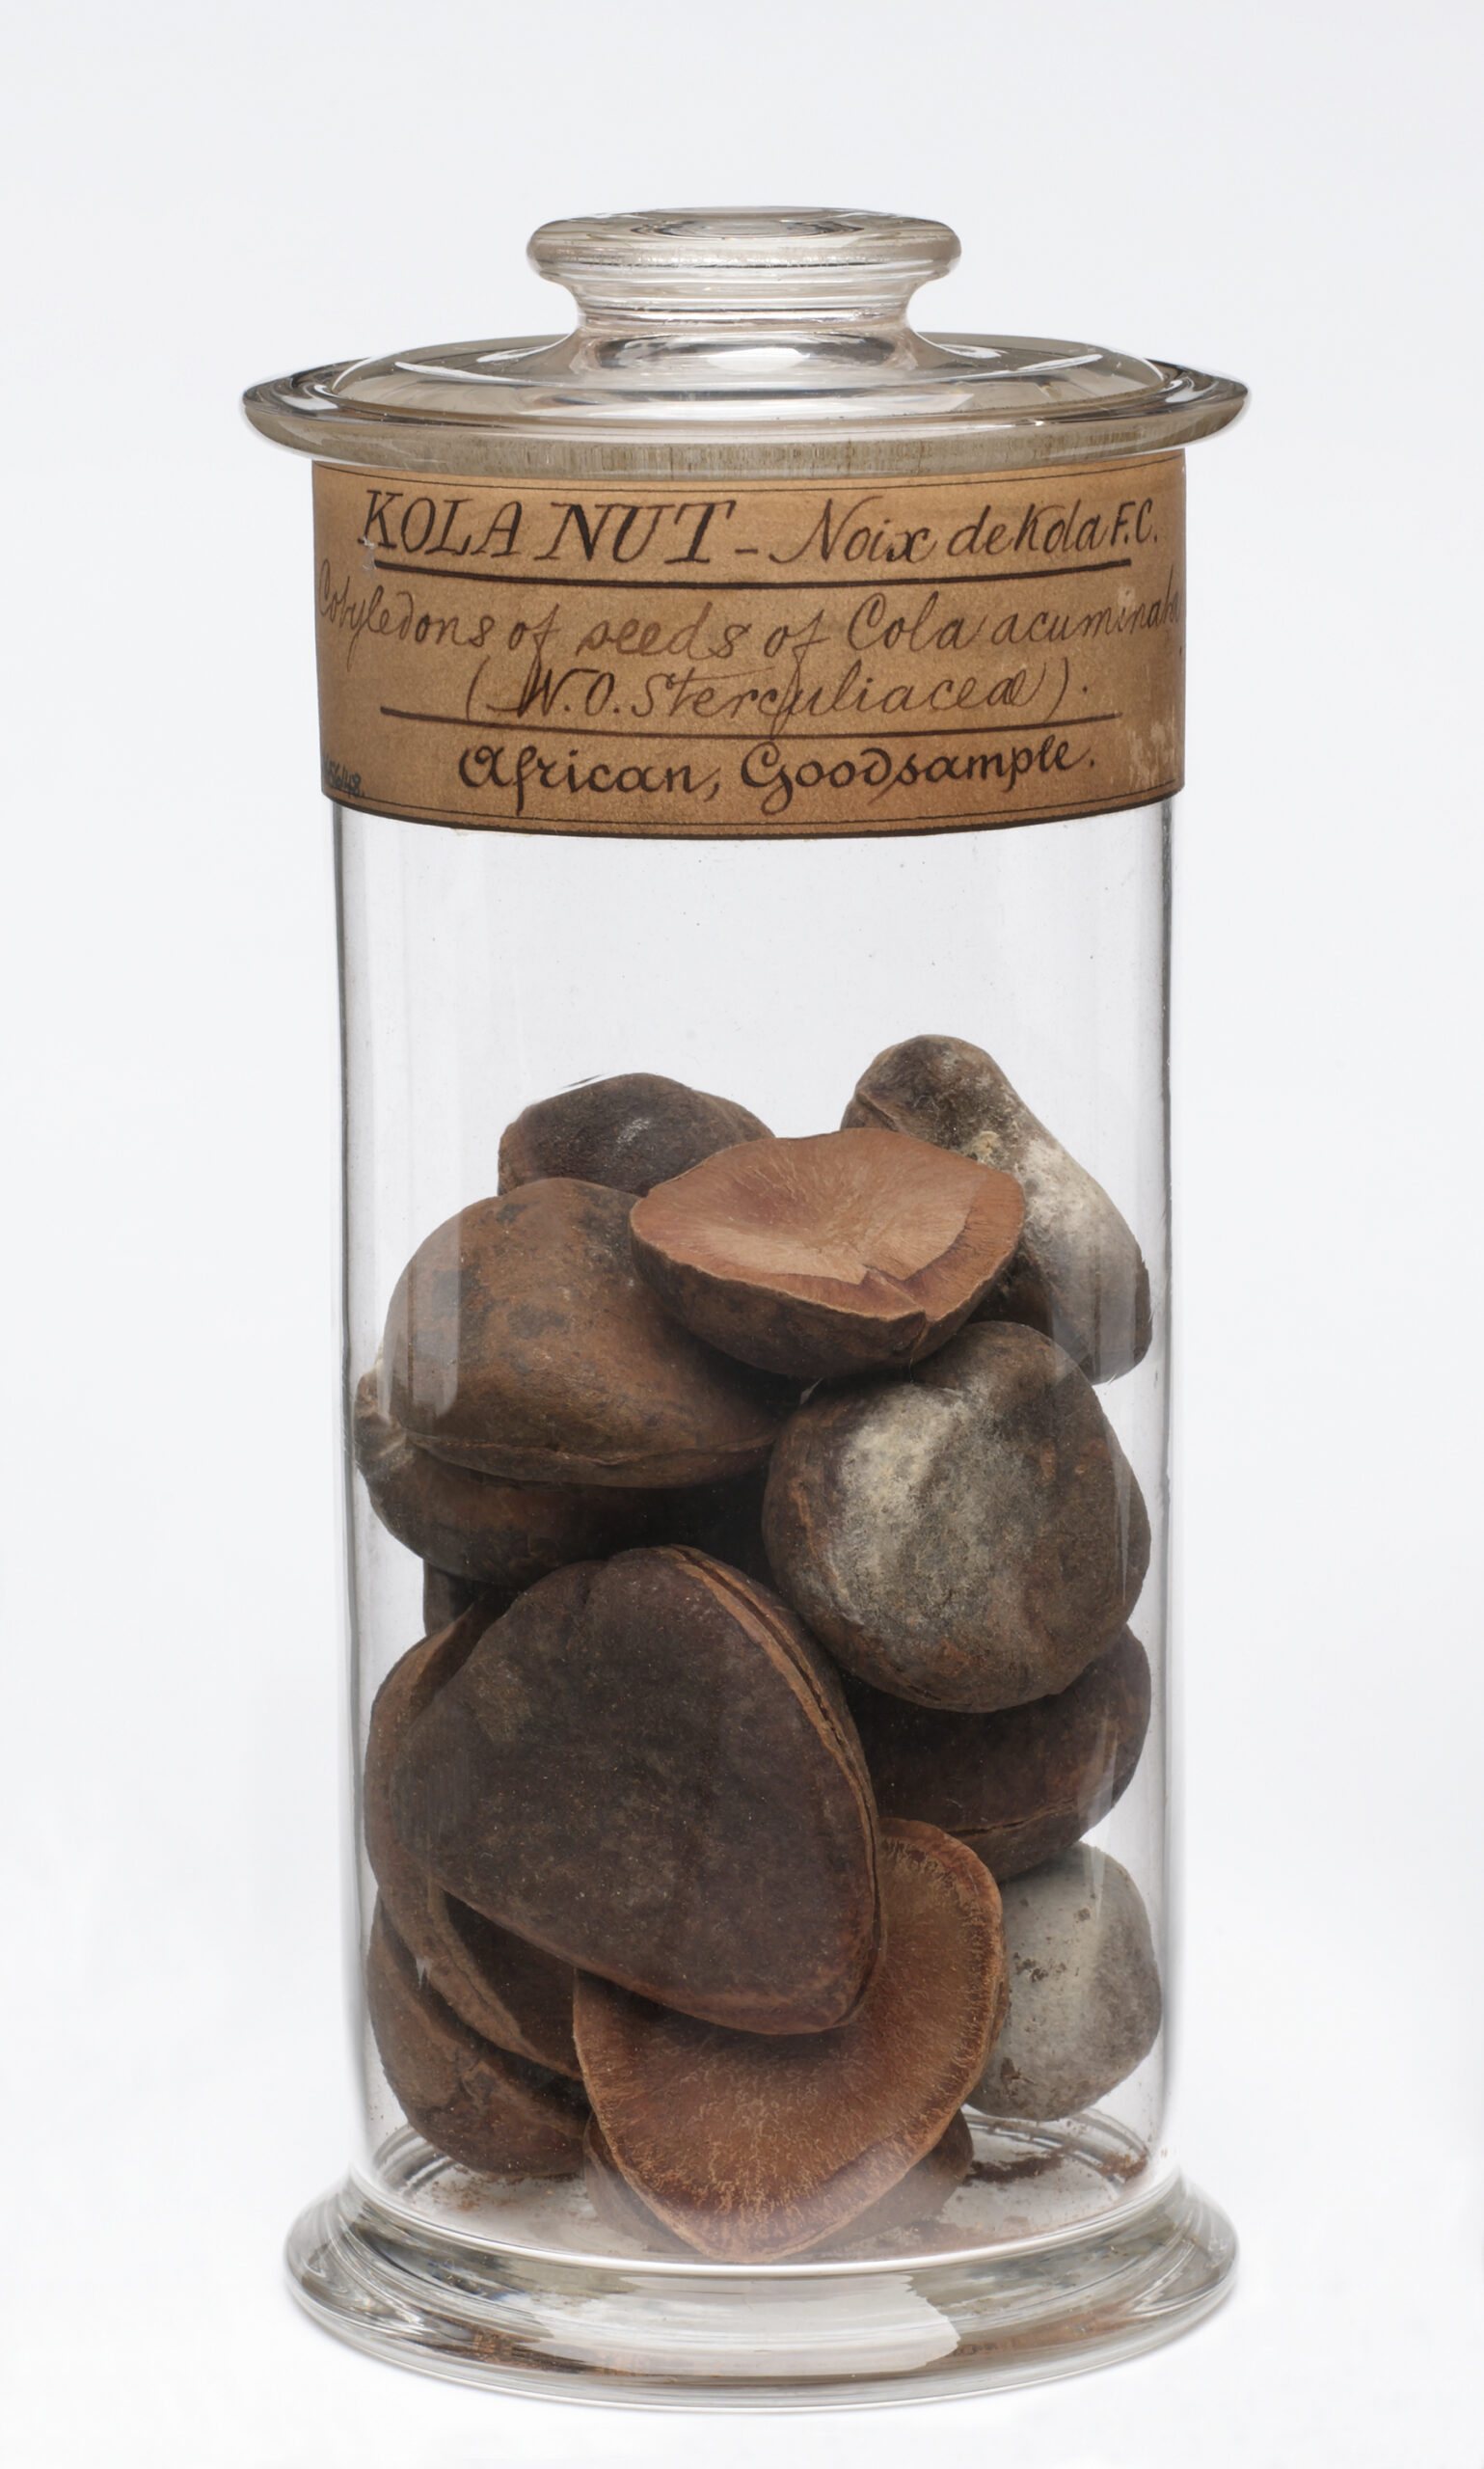 Jar containing large kola nuts from Africa, bottled in England, 1830-1920.